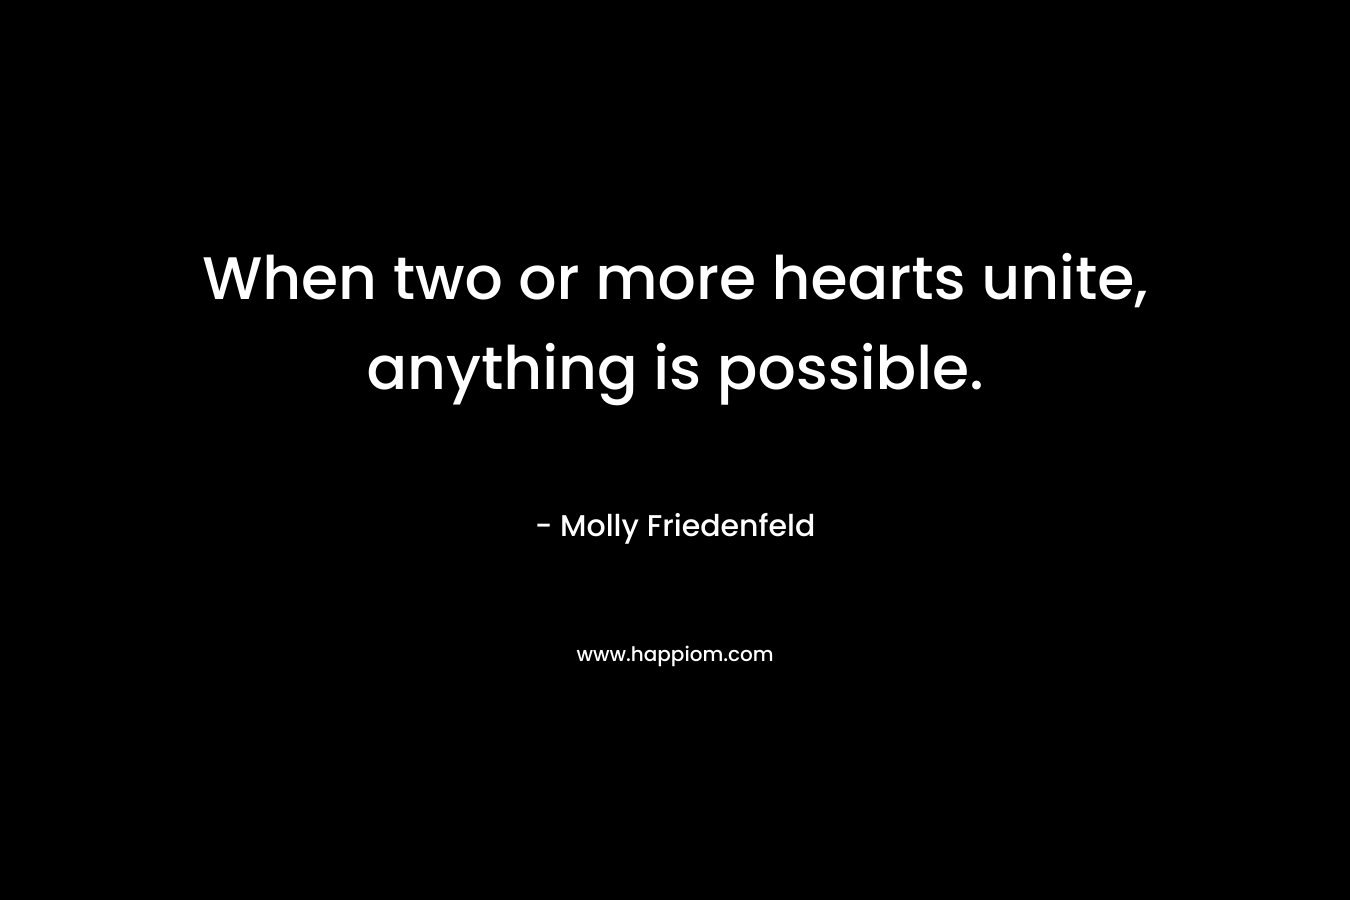 When two or more hearts unite, anything is possible. – Molly Friedenfeld